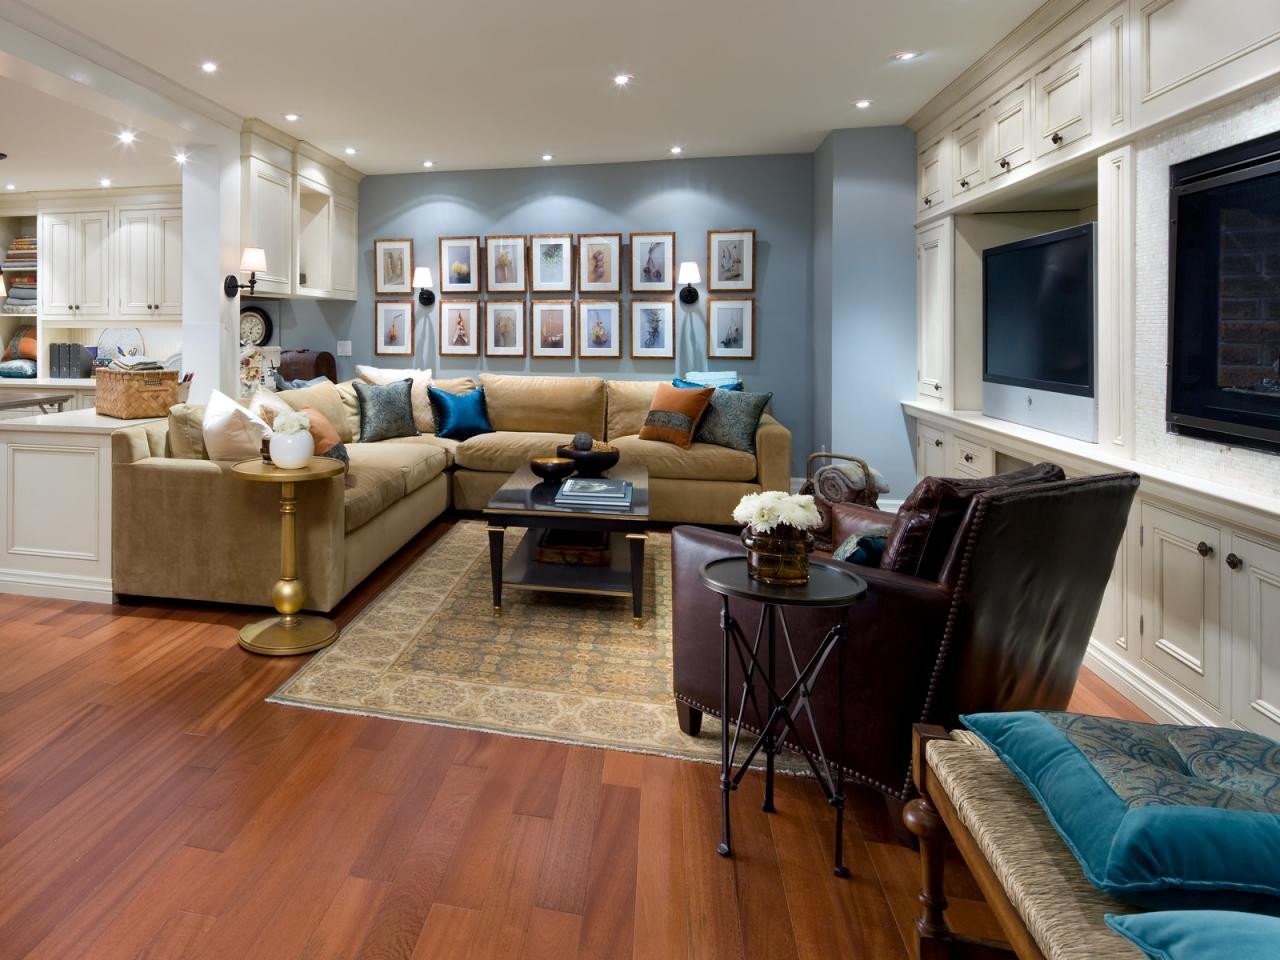 Small Basement Living Room Ideas 10 Chic Basements by Candice Olson